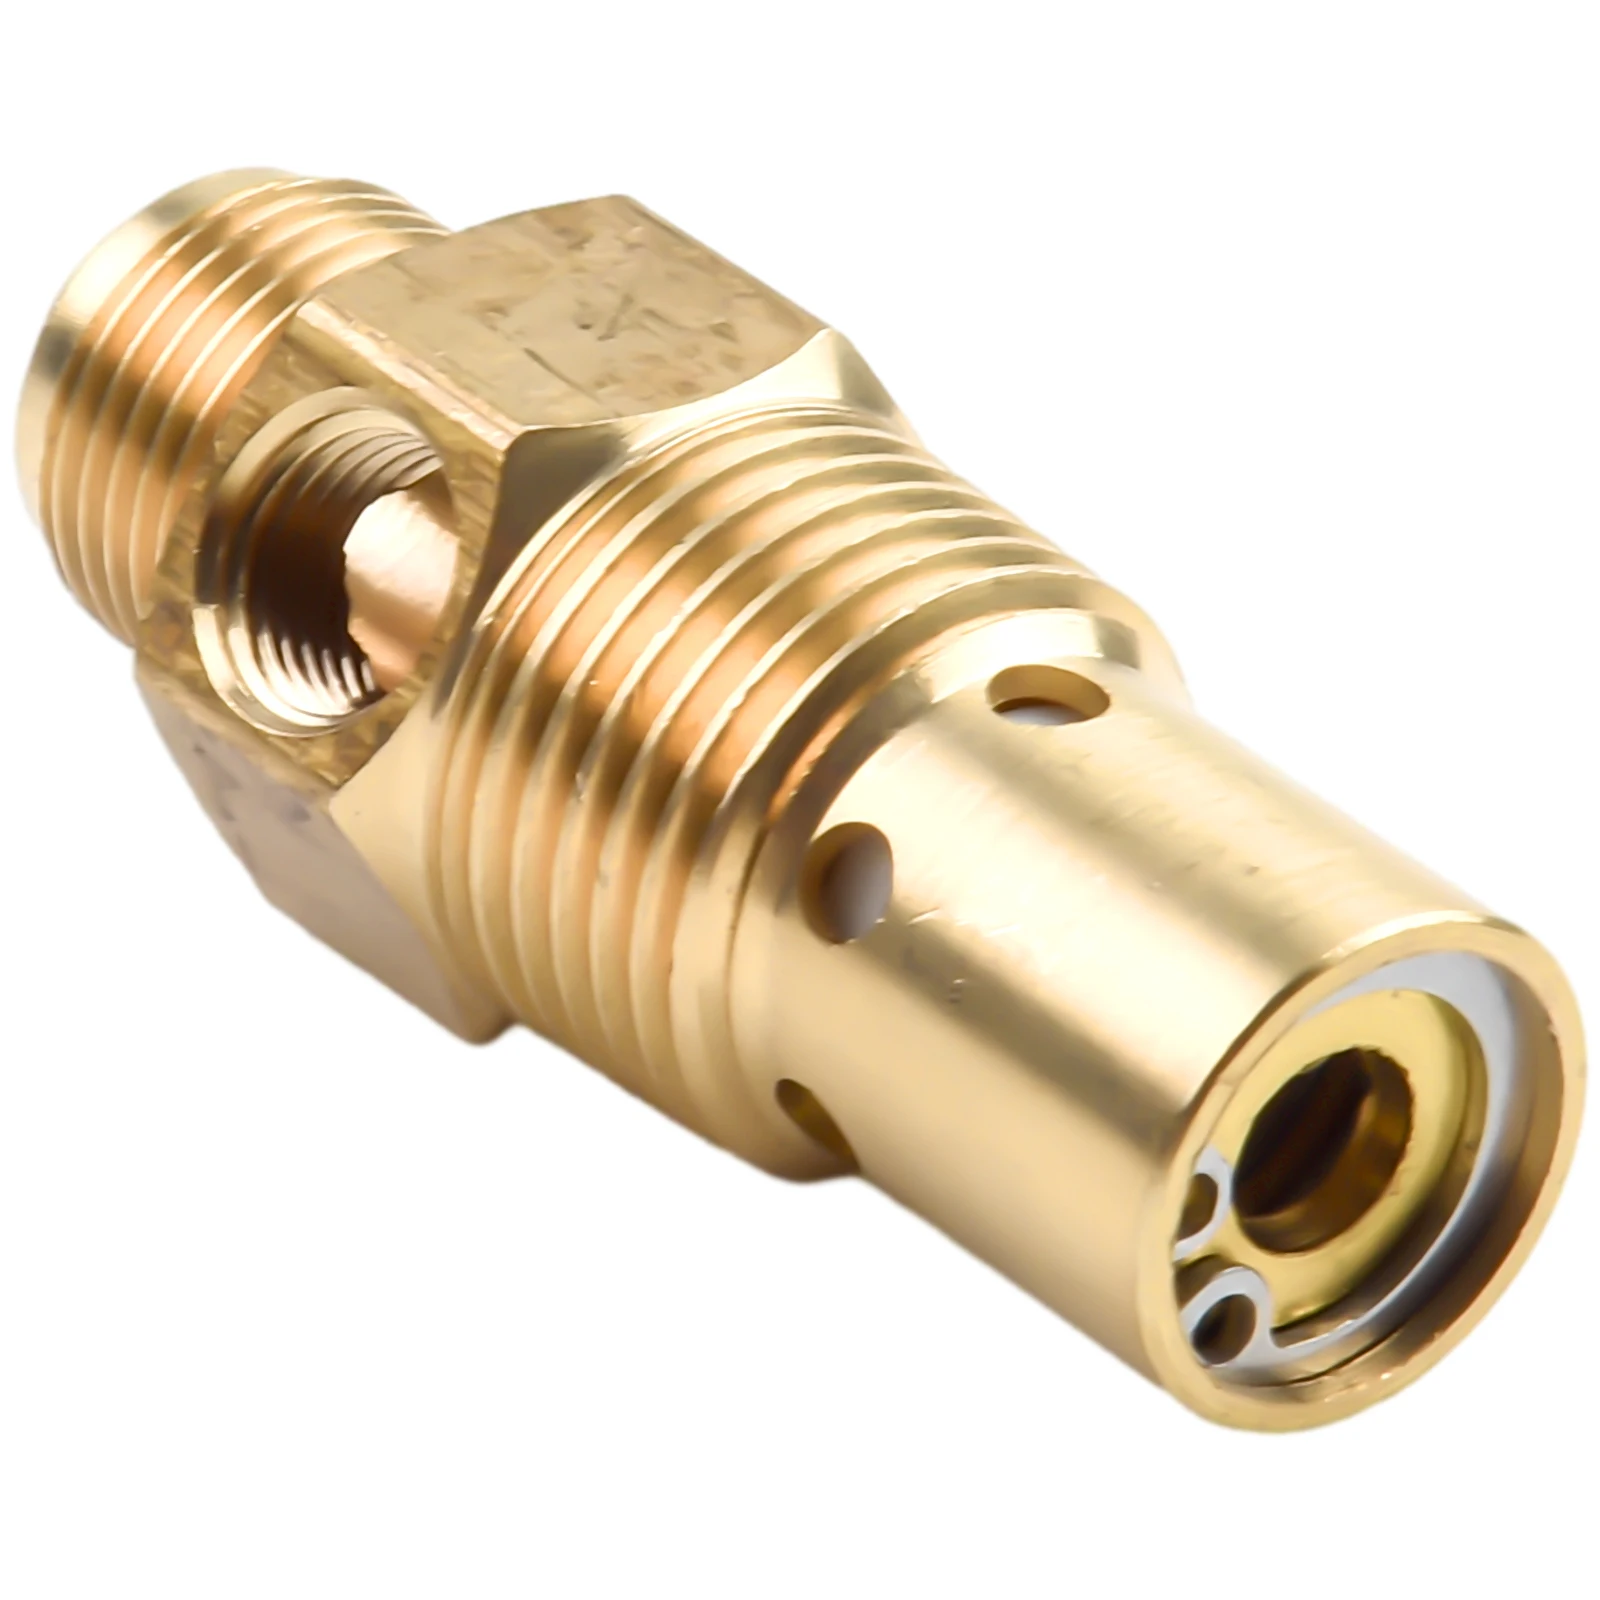 Brass Check Valve G3/8 Air Compressor Male Threaded NPT×1/2In For Air Compressor Replacement Radiator Check Valve air compressor one way valve check valve 65 90 spool silicone spool air pump spring plug